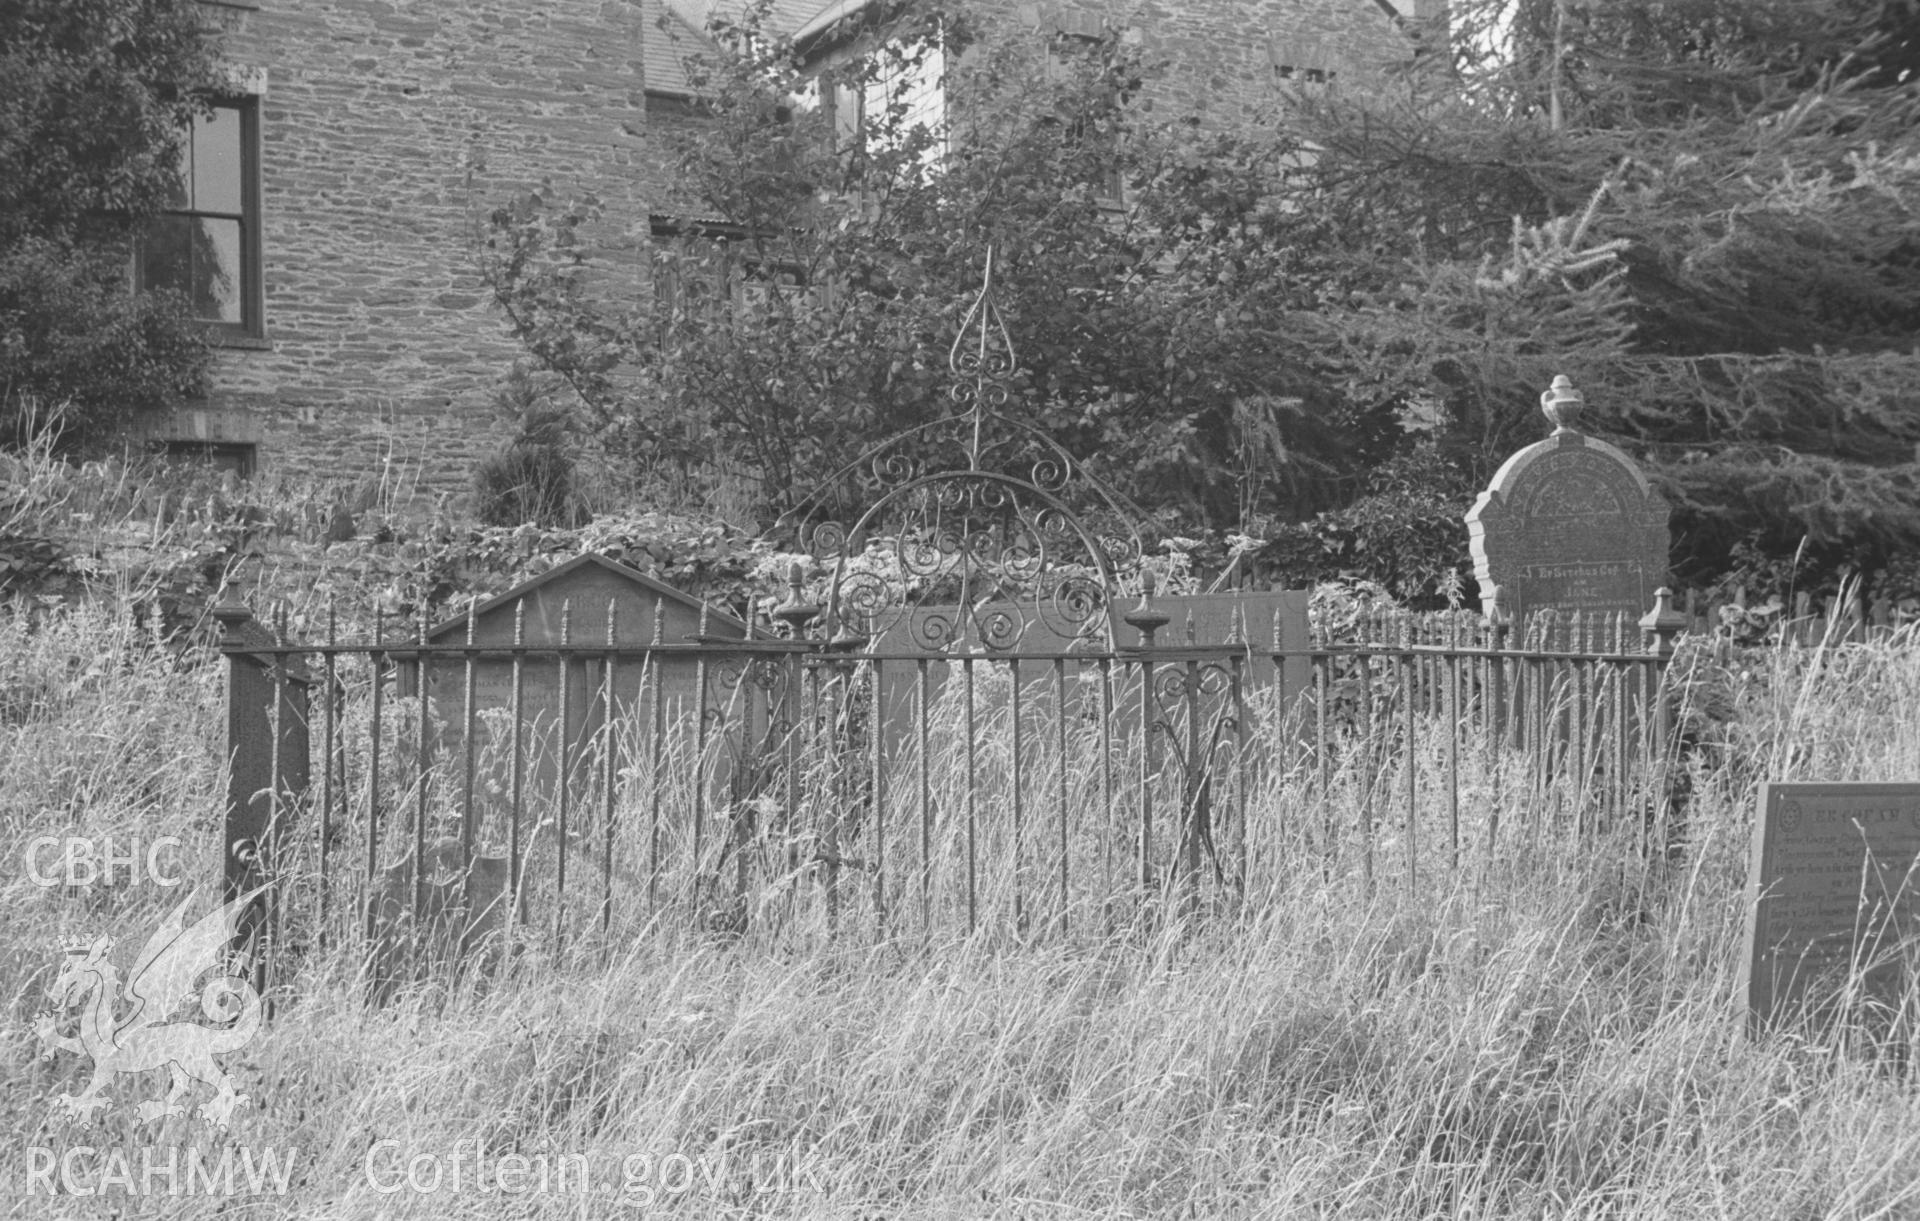 Digital copy of a black and white negative showing wrought and cast iron grave enclosure in the churchyard at Llandysul. Photographed by Arthur O. Chater in August 1965 from Grid Reference SN 4188 4070, looking north west.